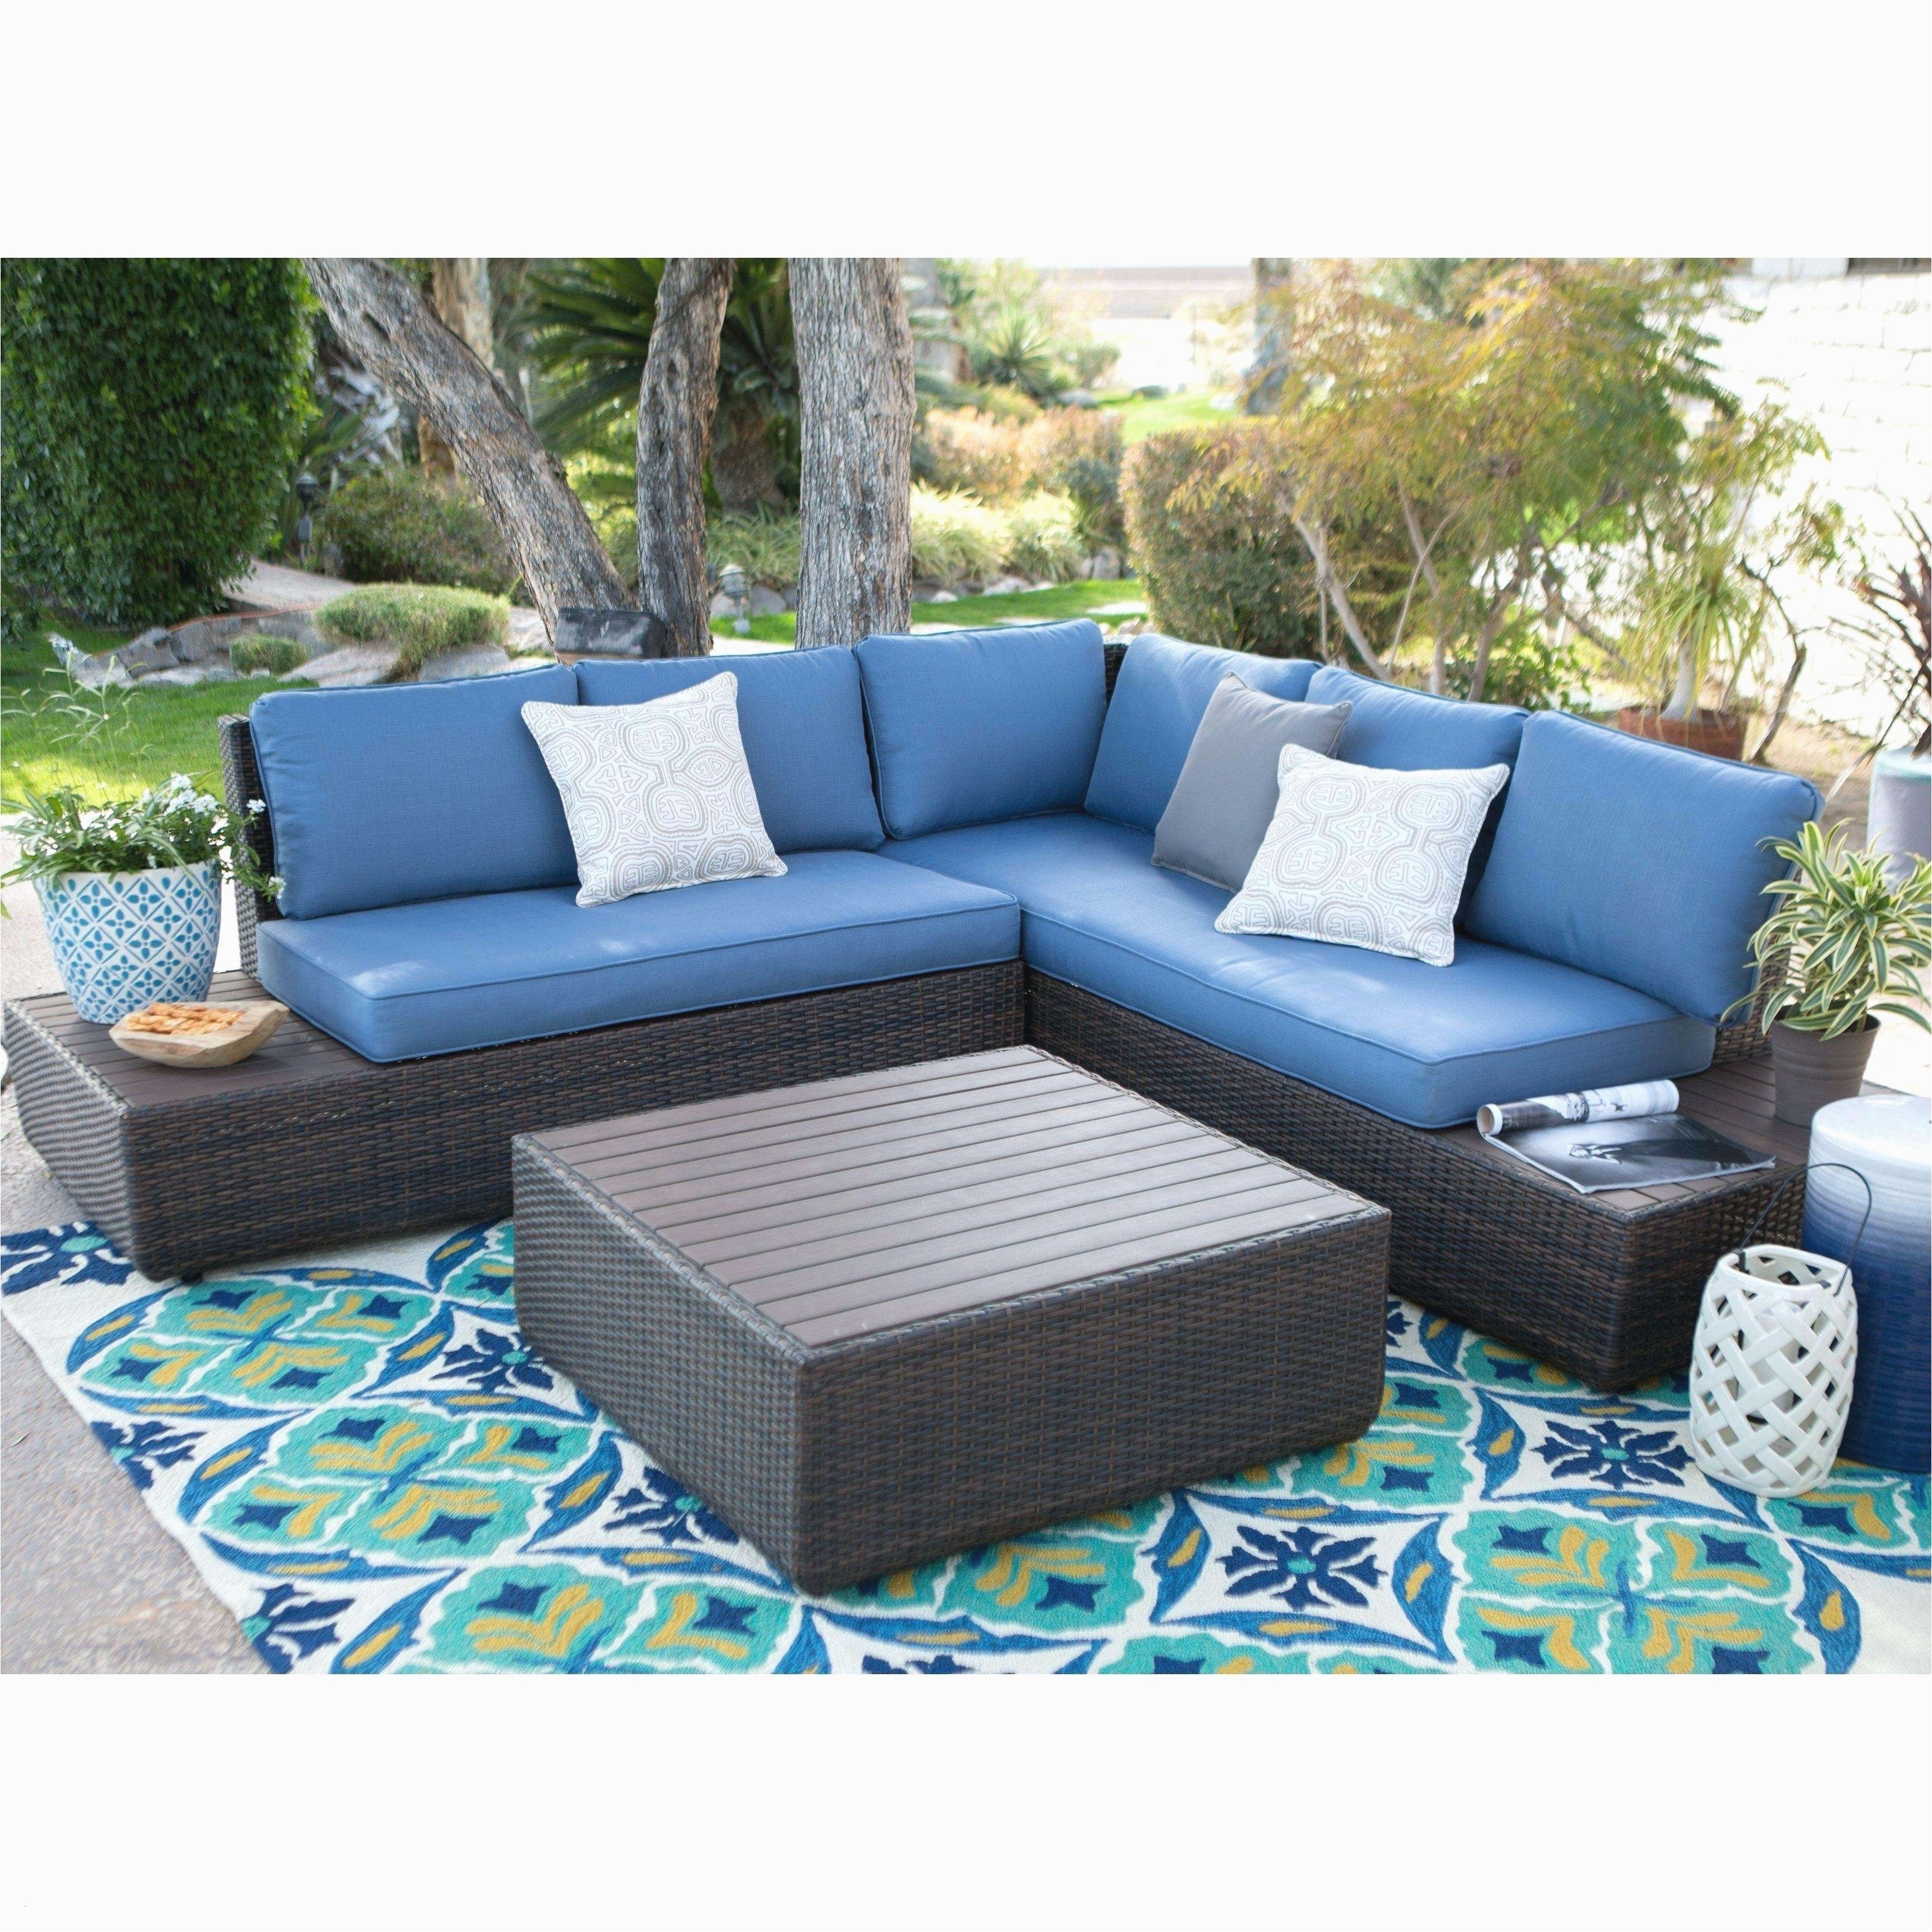 outdoor patio seat cushions awesome wicker outdoor sofa 0d patio chairs sale replacement cushions outdoor